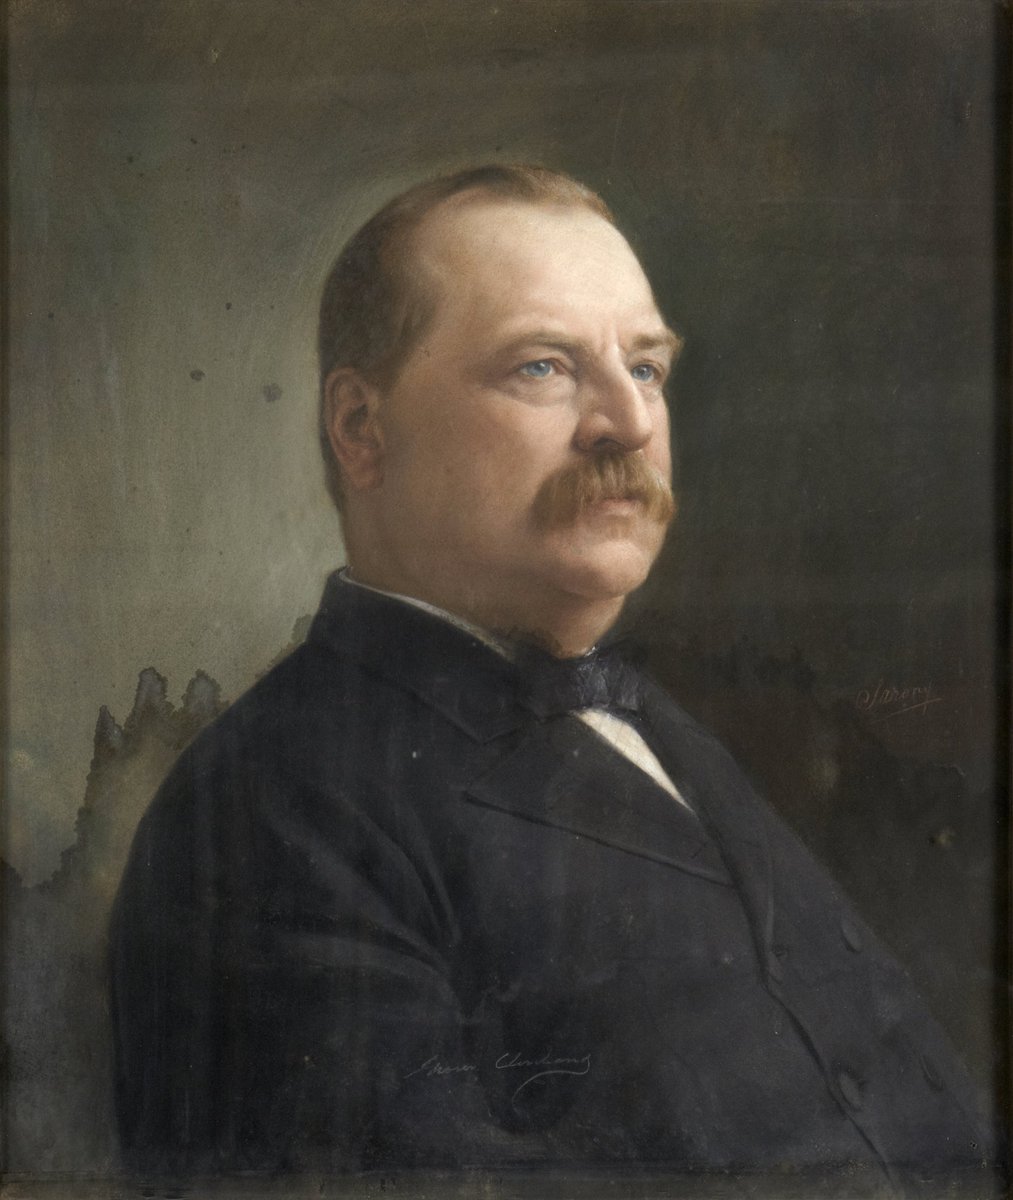 American politician and lawyer #GroverCleveland died from a heart attack #onthisday way back in 1908. 🇺🇸 #POTUS #America #UnitedStates #US #politics #USA #history #trivia